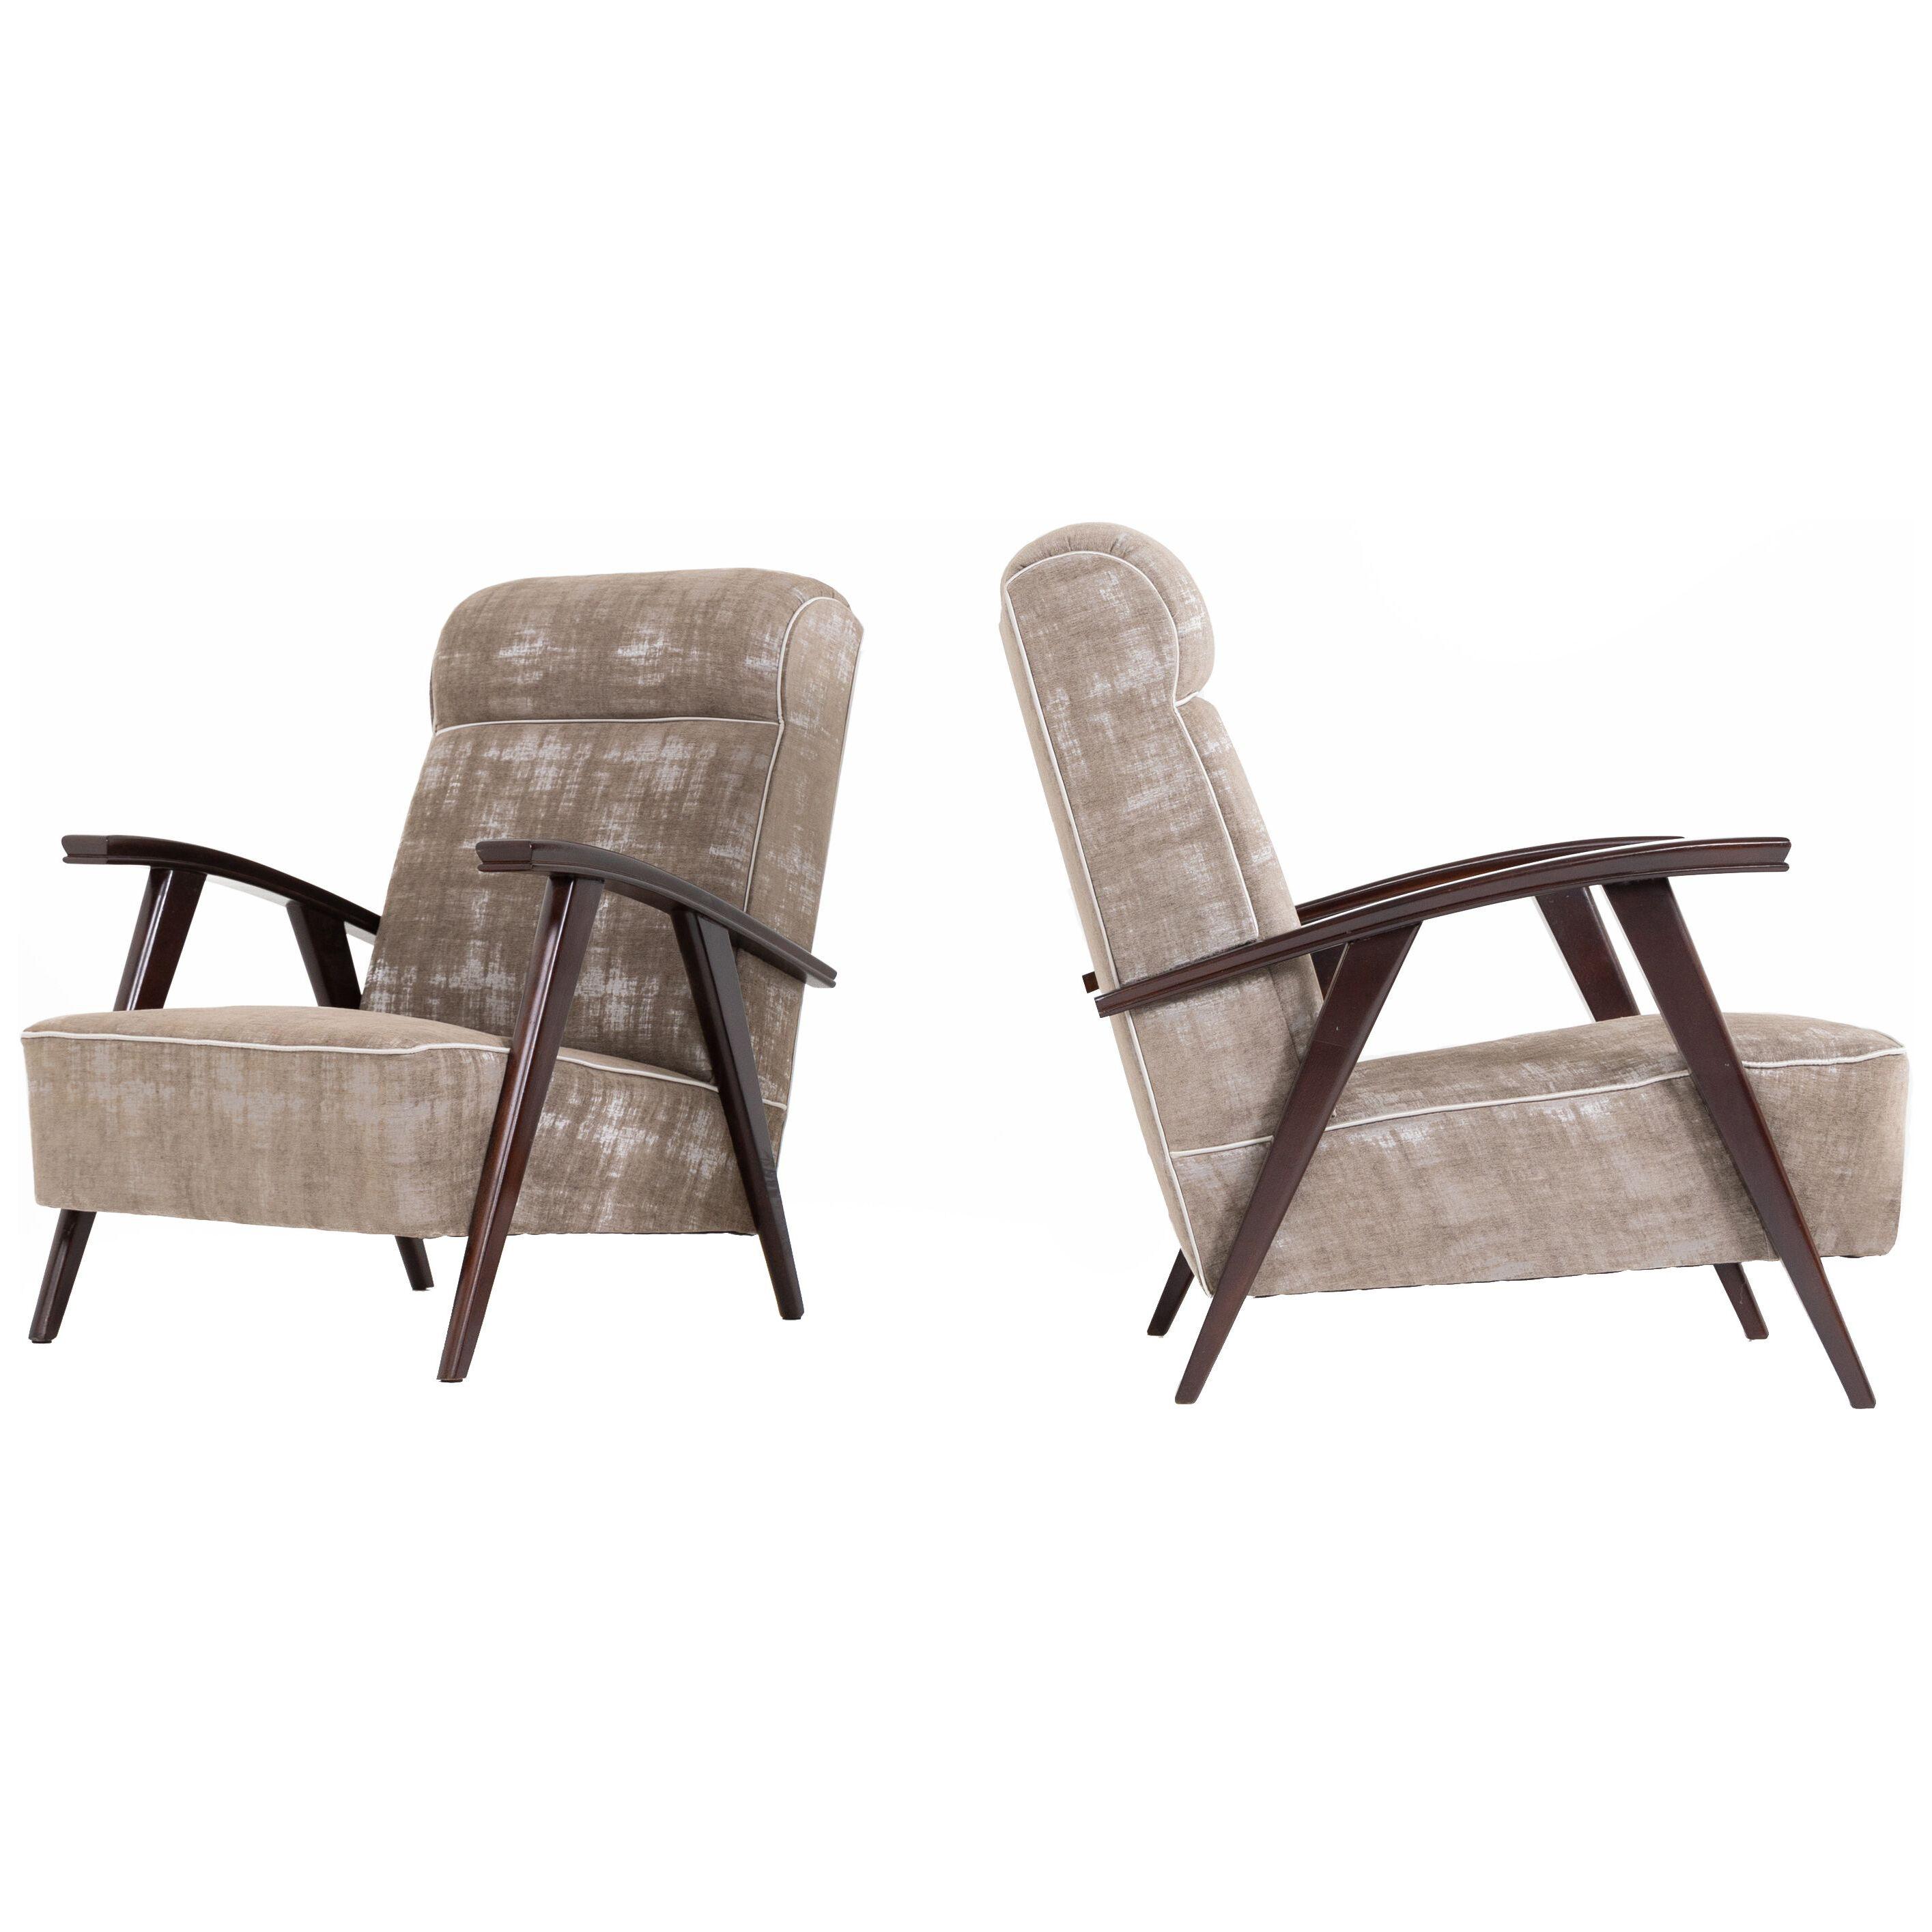 PAIR OF MODERNIST ARMCHAIRS ATTRIBUTED TO JACQUES ADNET